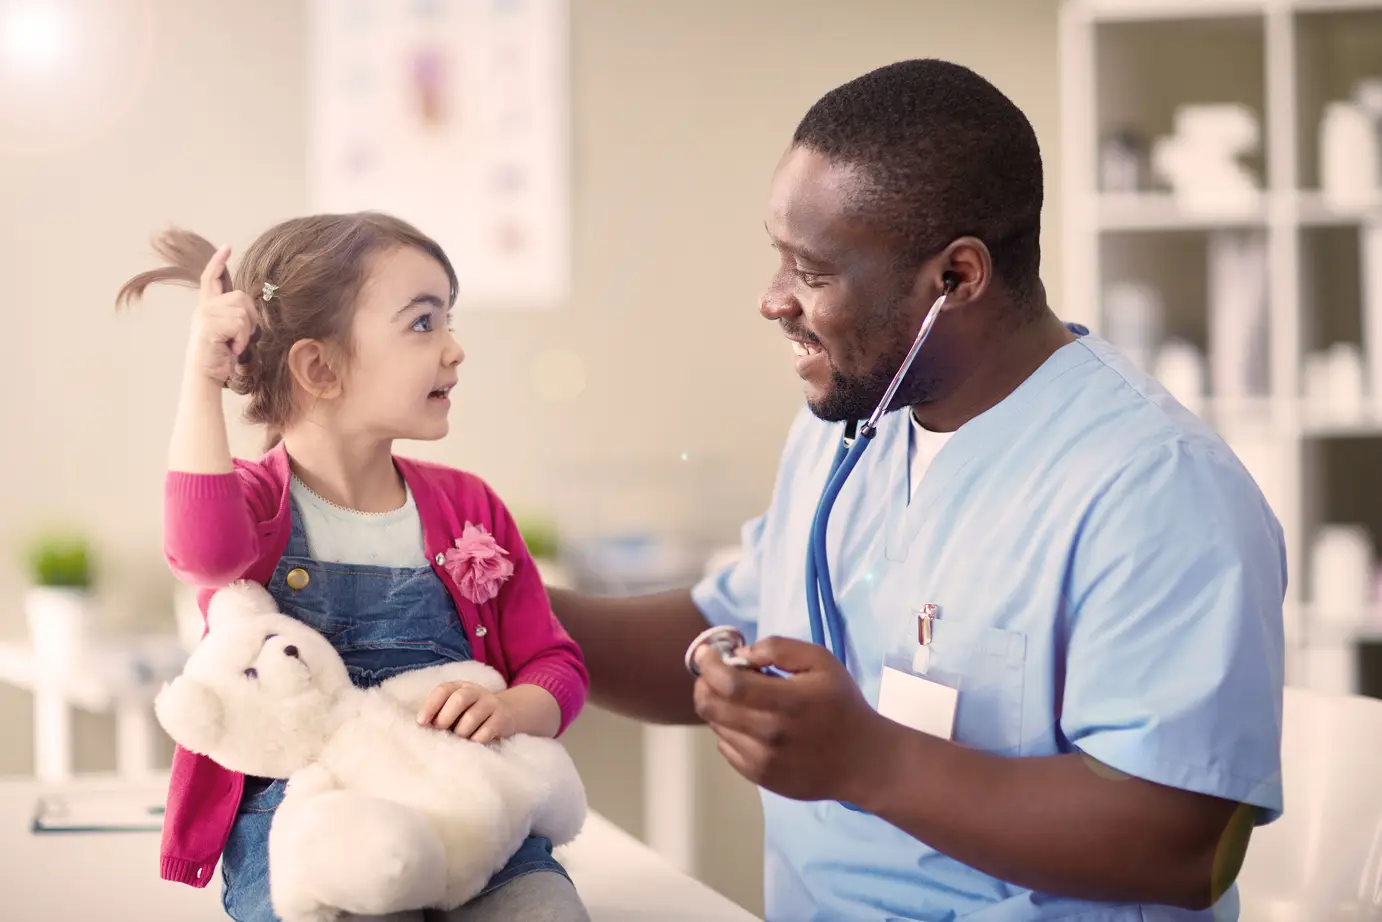 A young girl talking to a healthcare professional at a patient visit